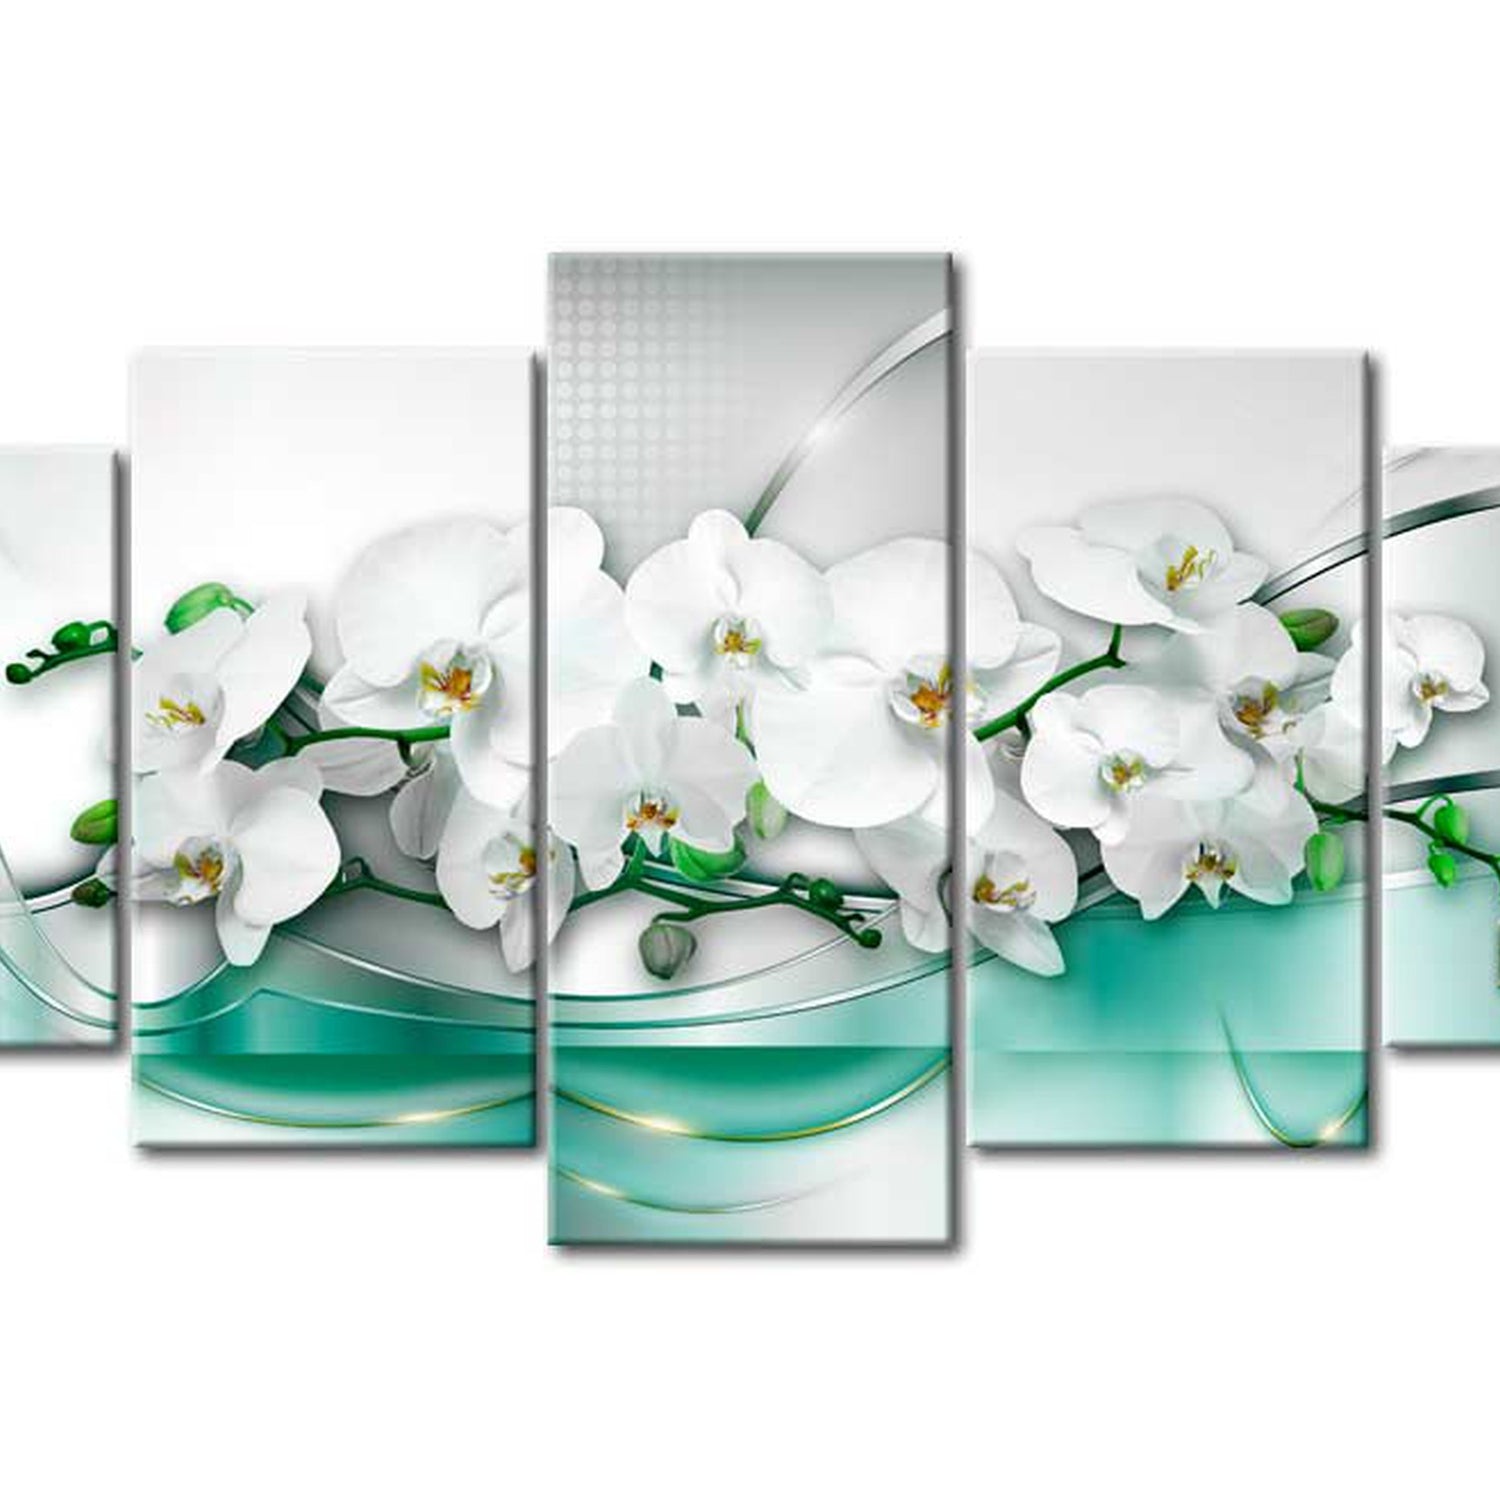 Glamour Canvas Wall Art - Celadon Ribbons - 5 Pieces